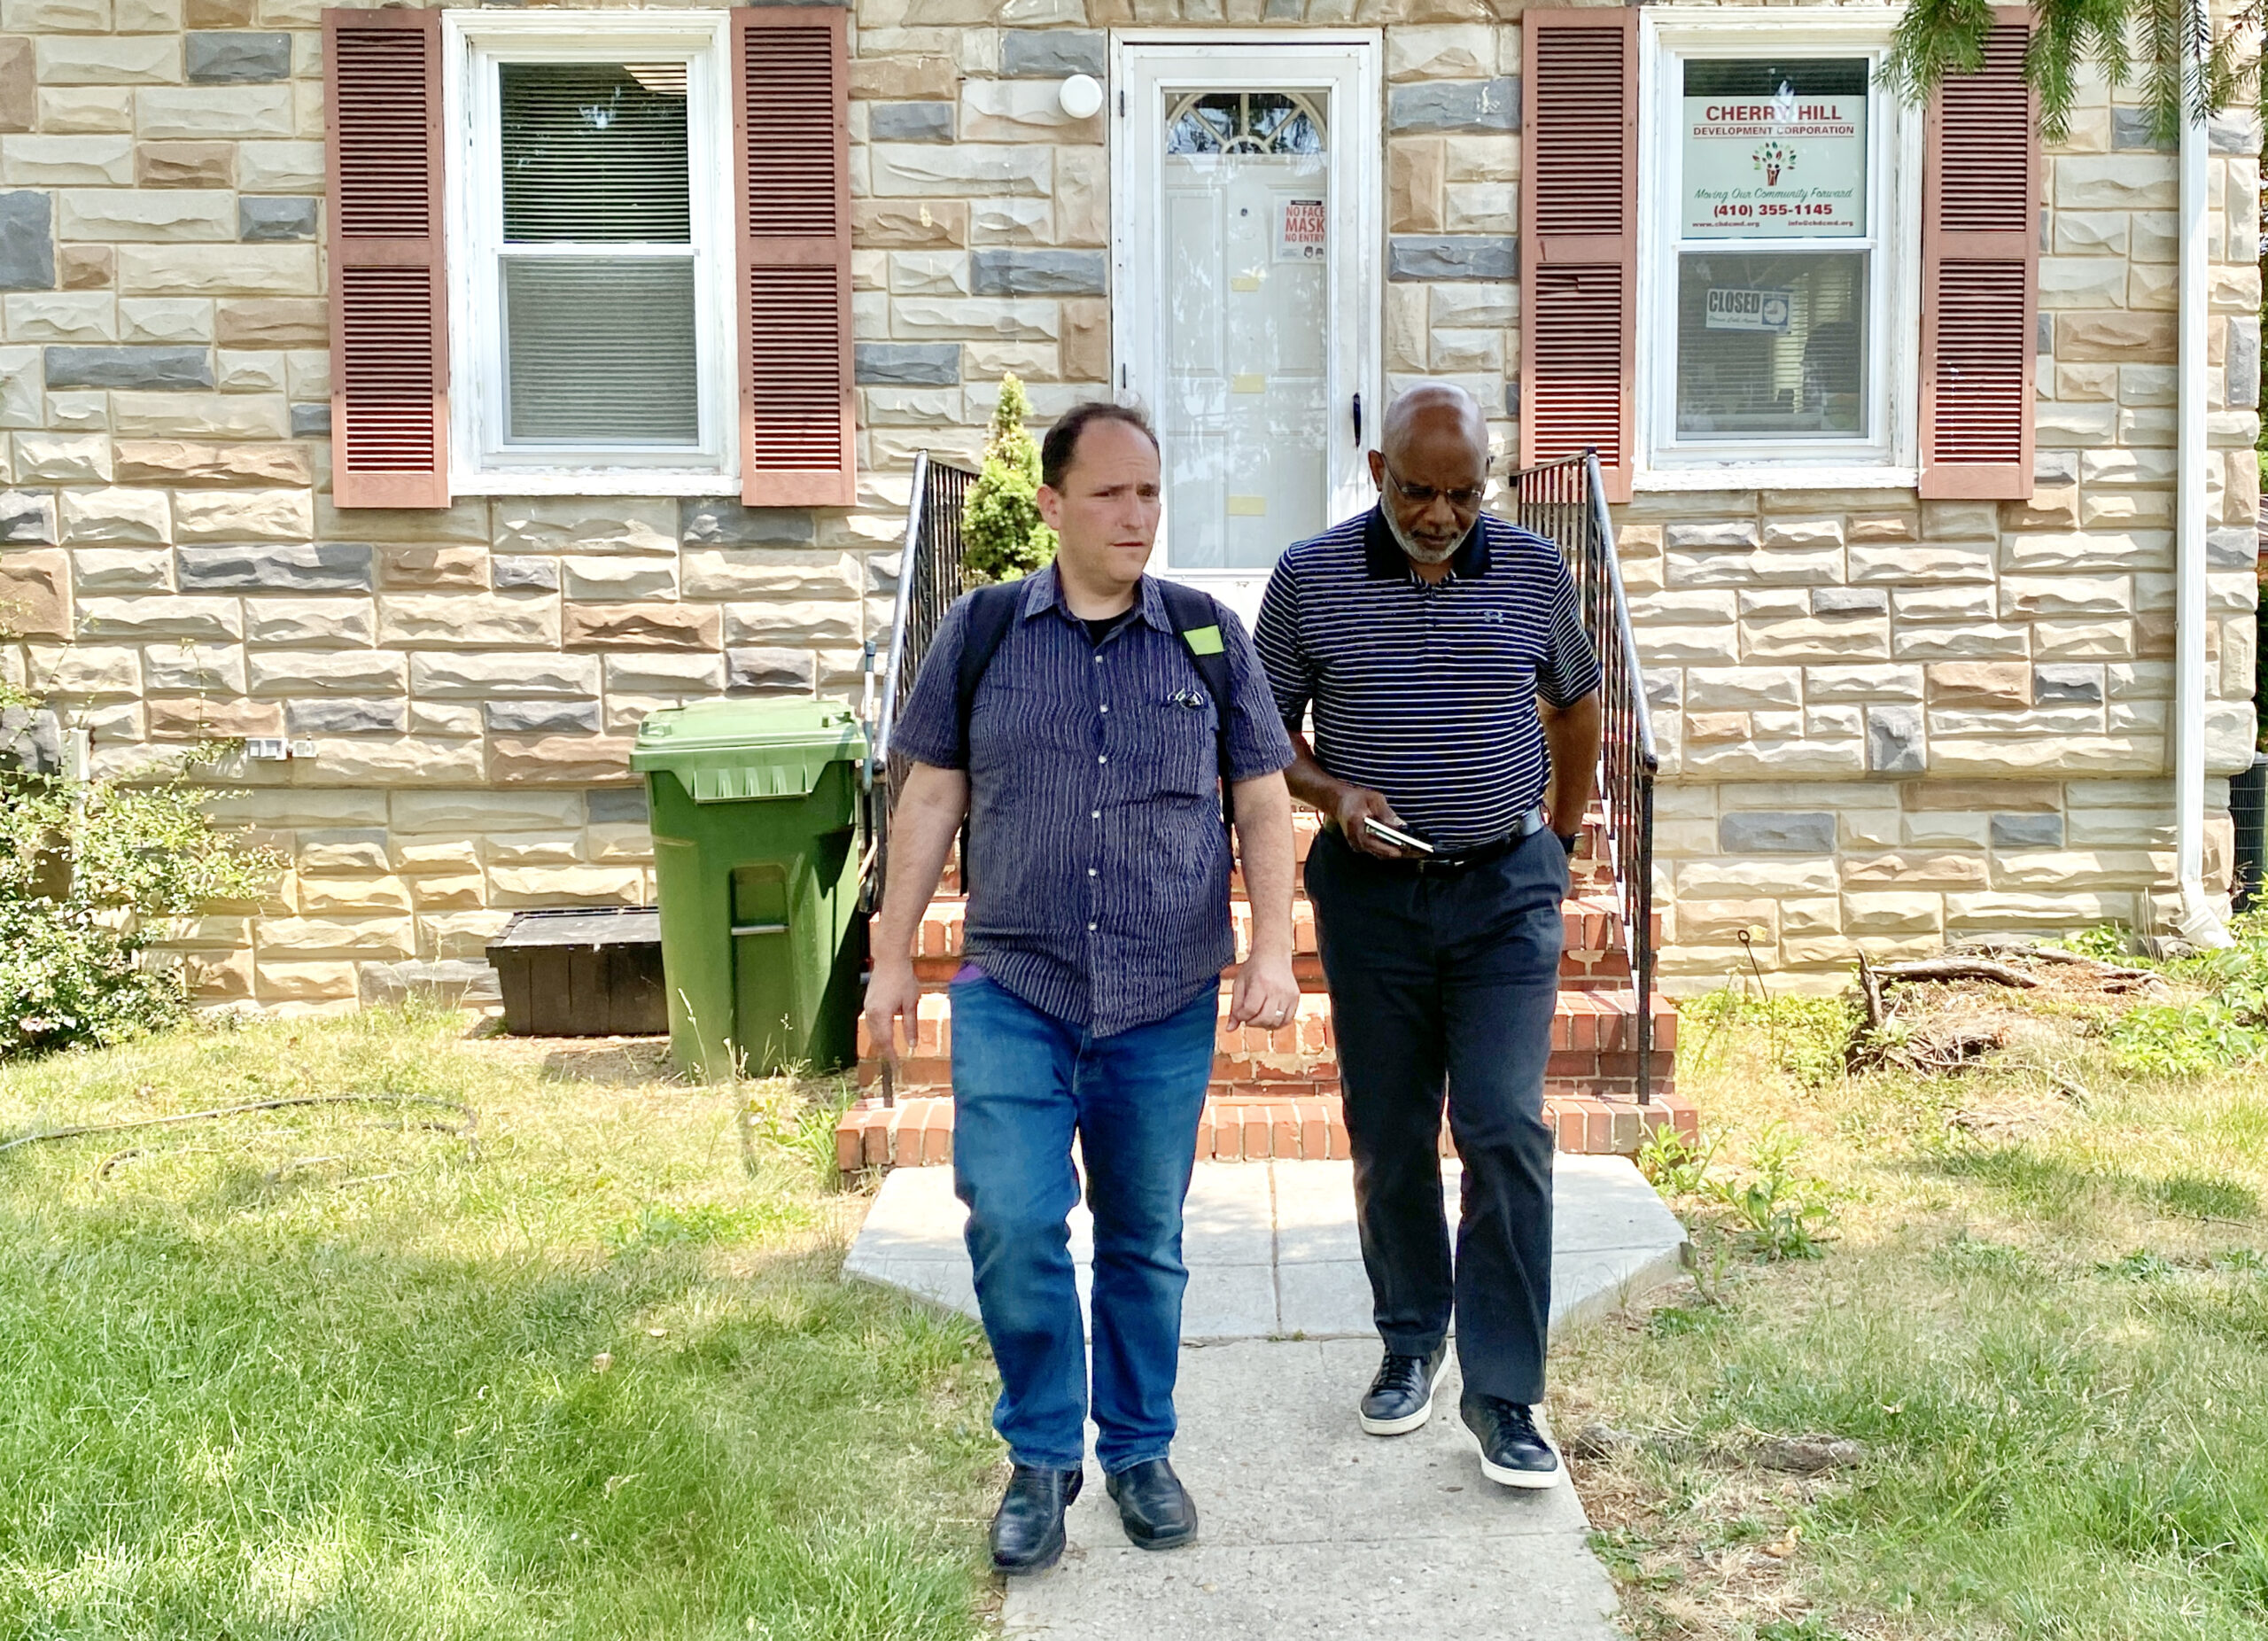 Brad Rogers, left, and Rev. Richard Partlow, the interim executive director of Cherry Hill Development Corporation, one of the community partners of the South Baltimore Gateway Partnership, on their way to a meeting at the Cherry Hill Strong's office nearby. Credit: Aman Azhar / Inside Climate News